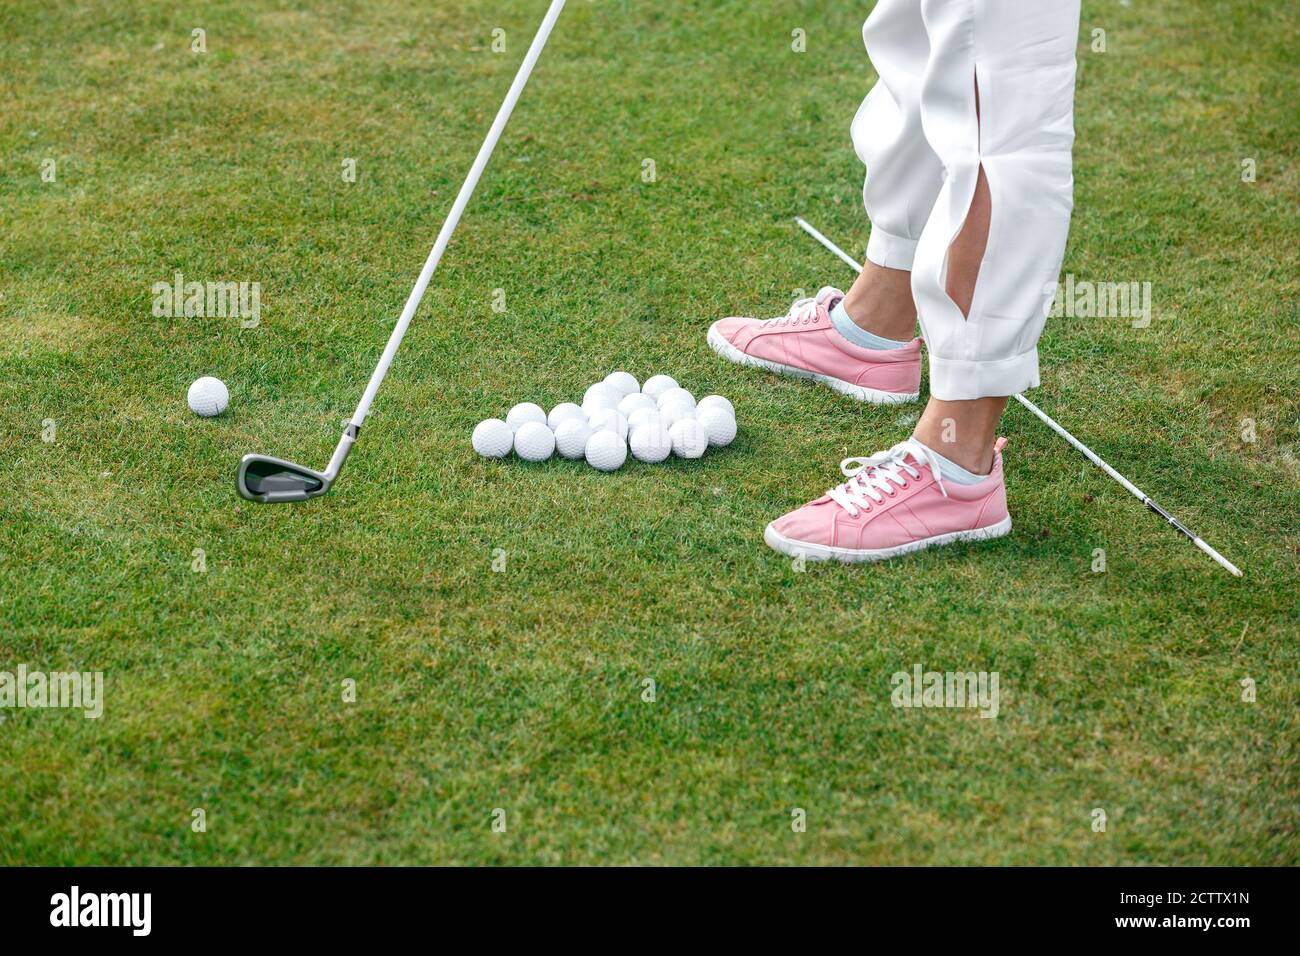 Learning to play Golf. The concept of the game of Golf Stock Photo